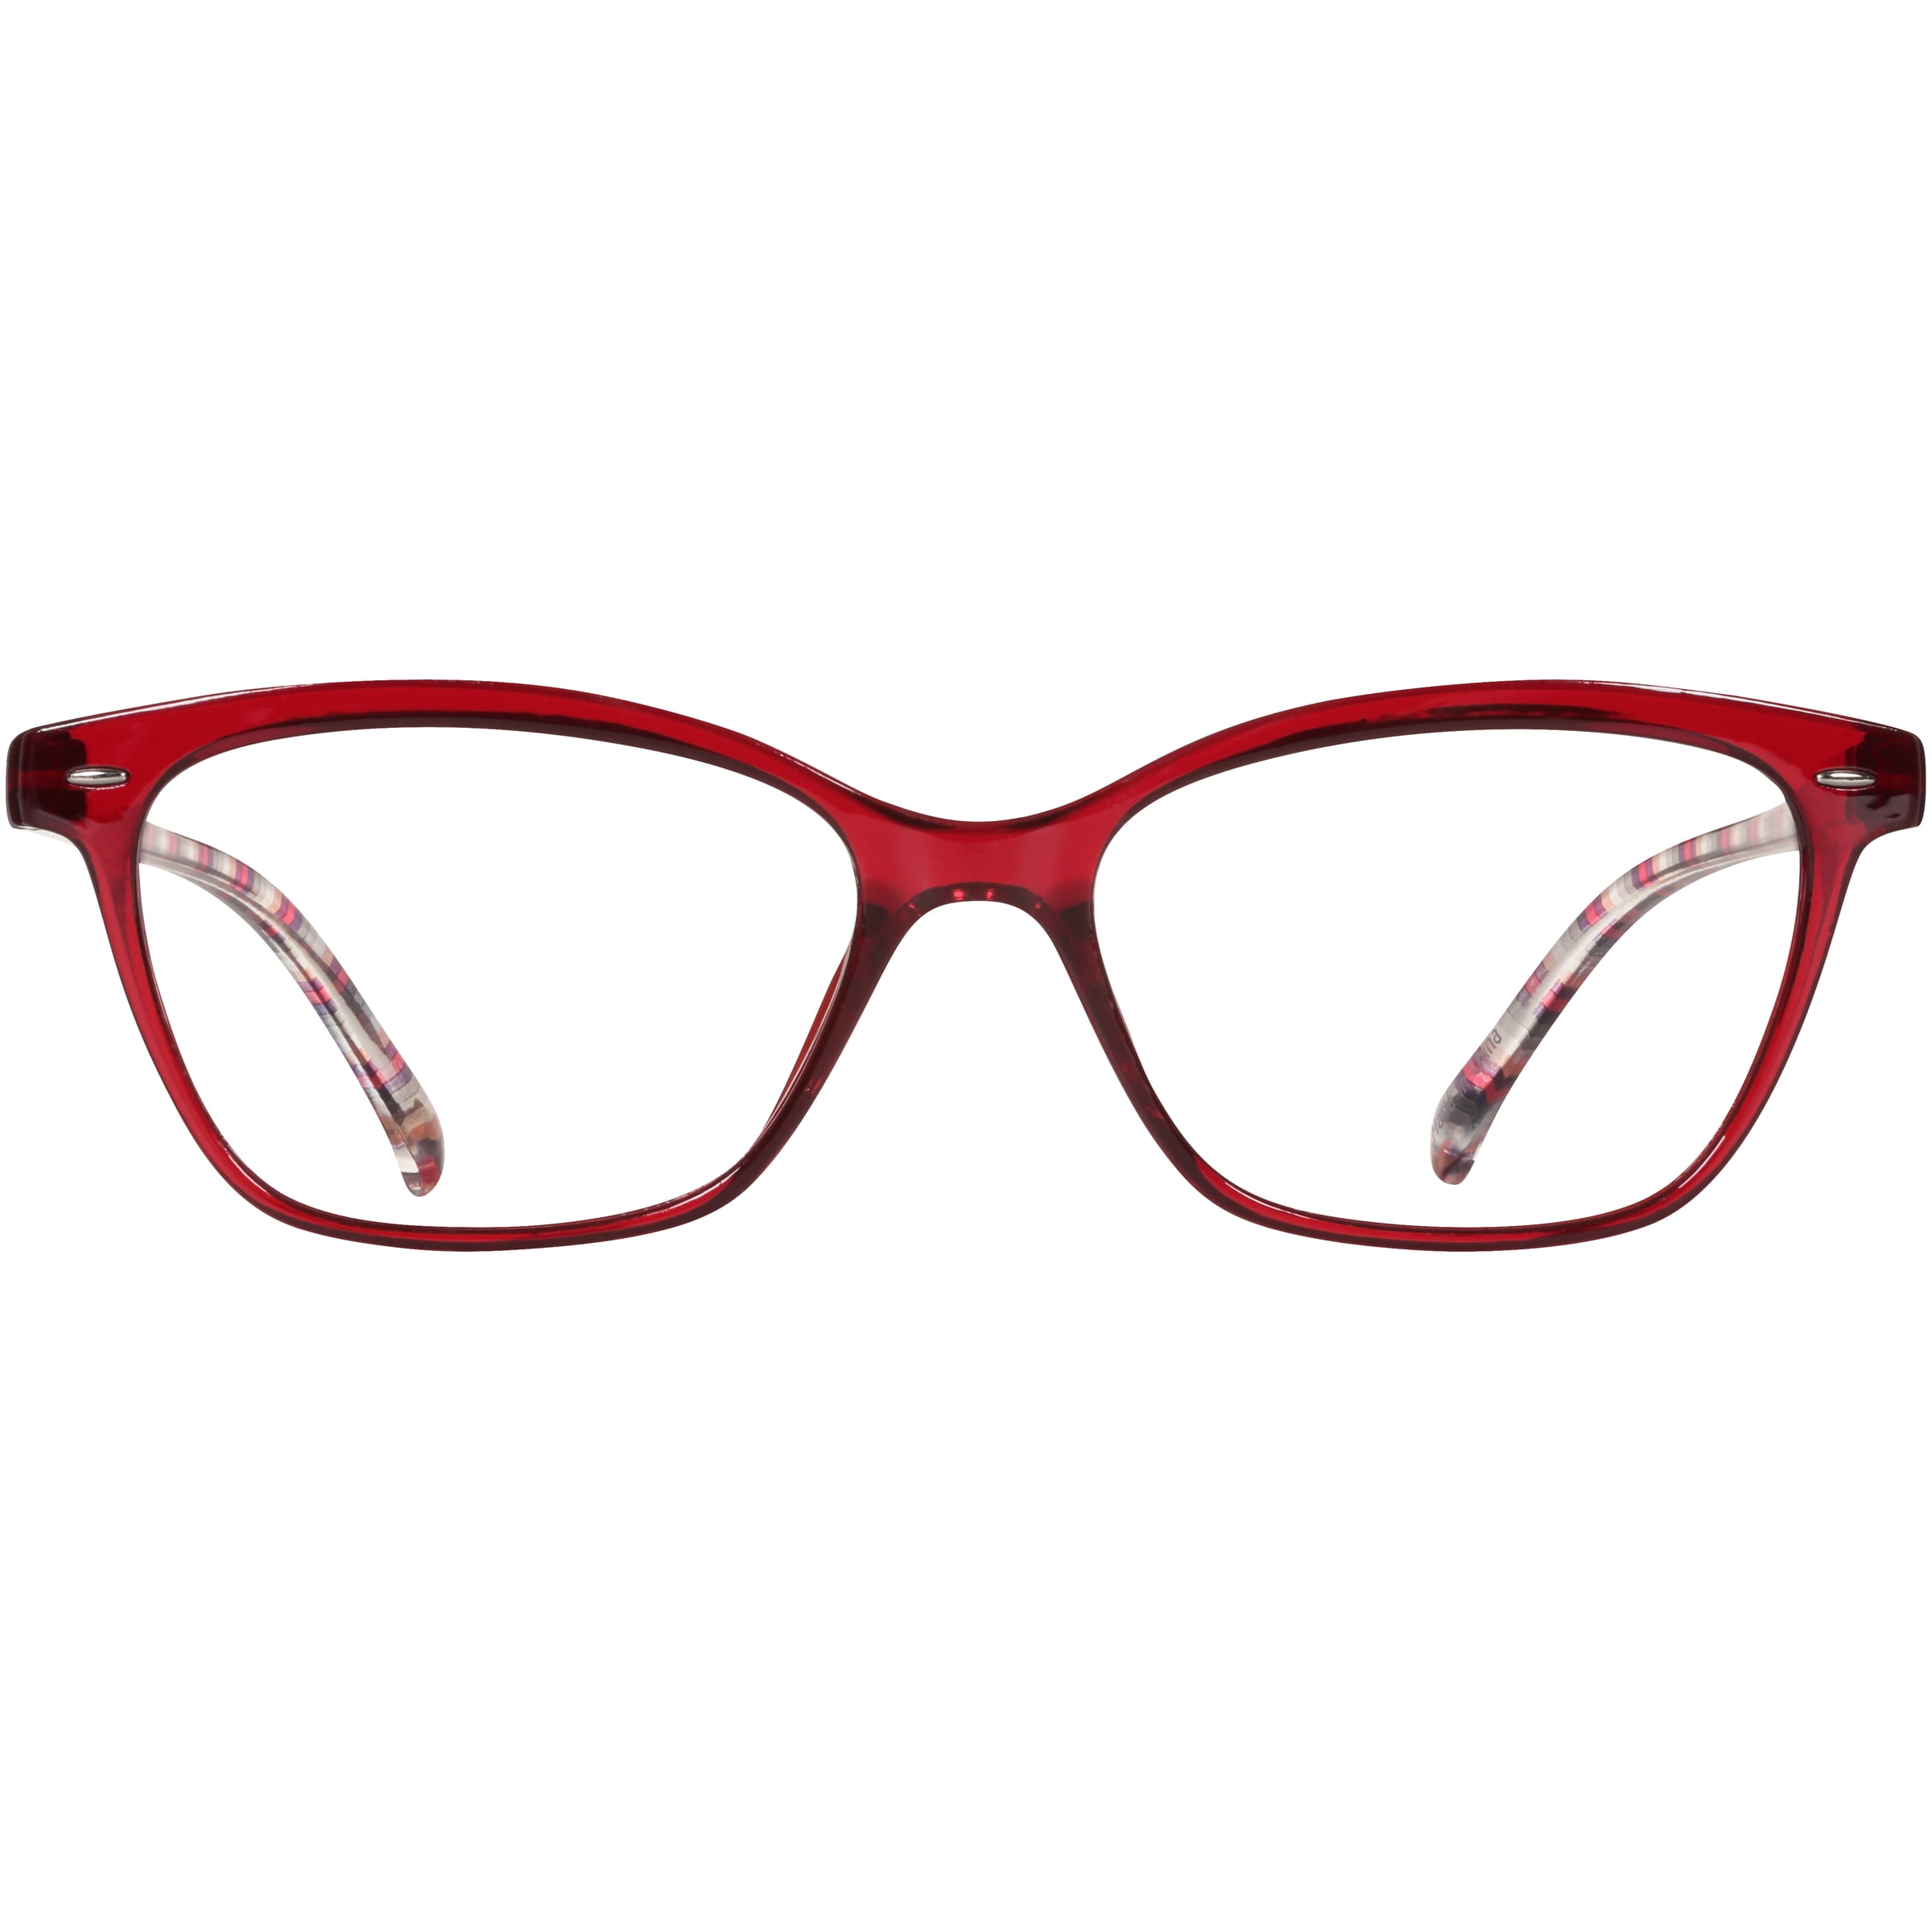 EV1 Pippa Crystal Red +1.50 Reading Glasses with Case